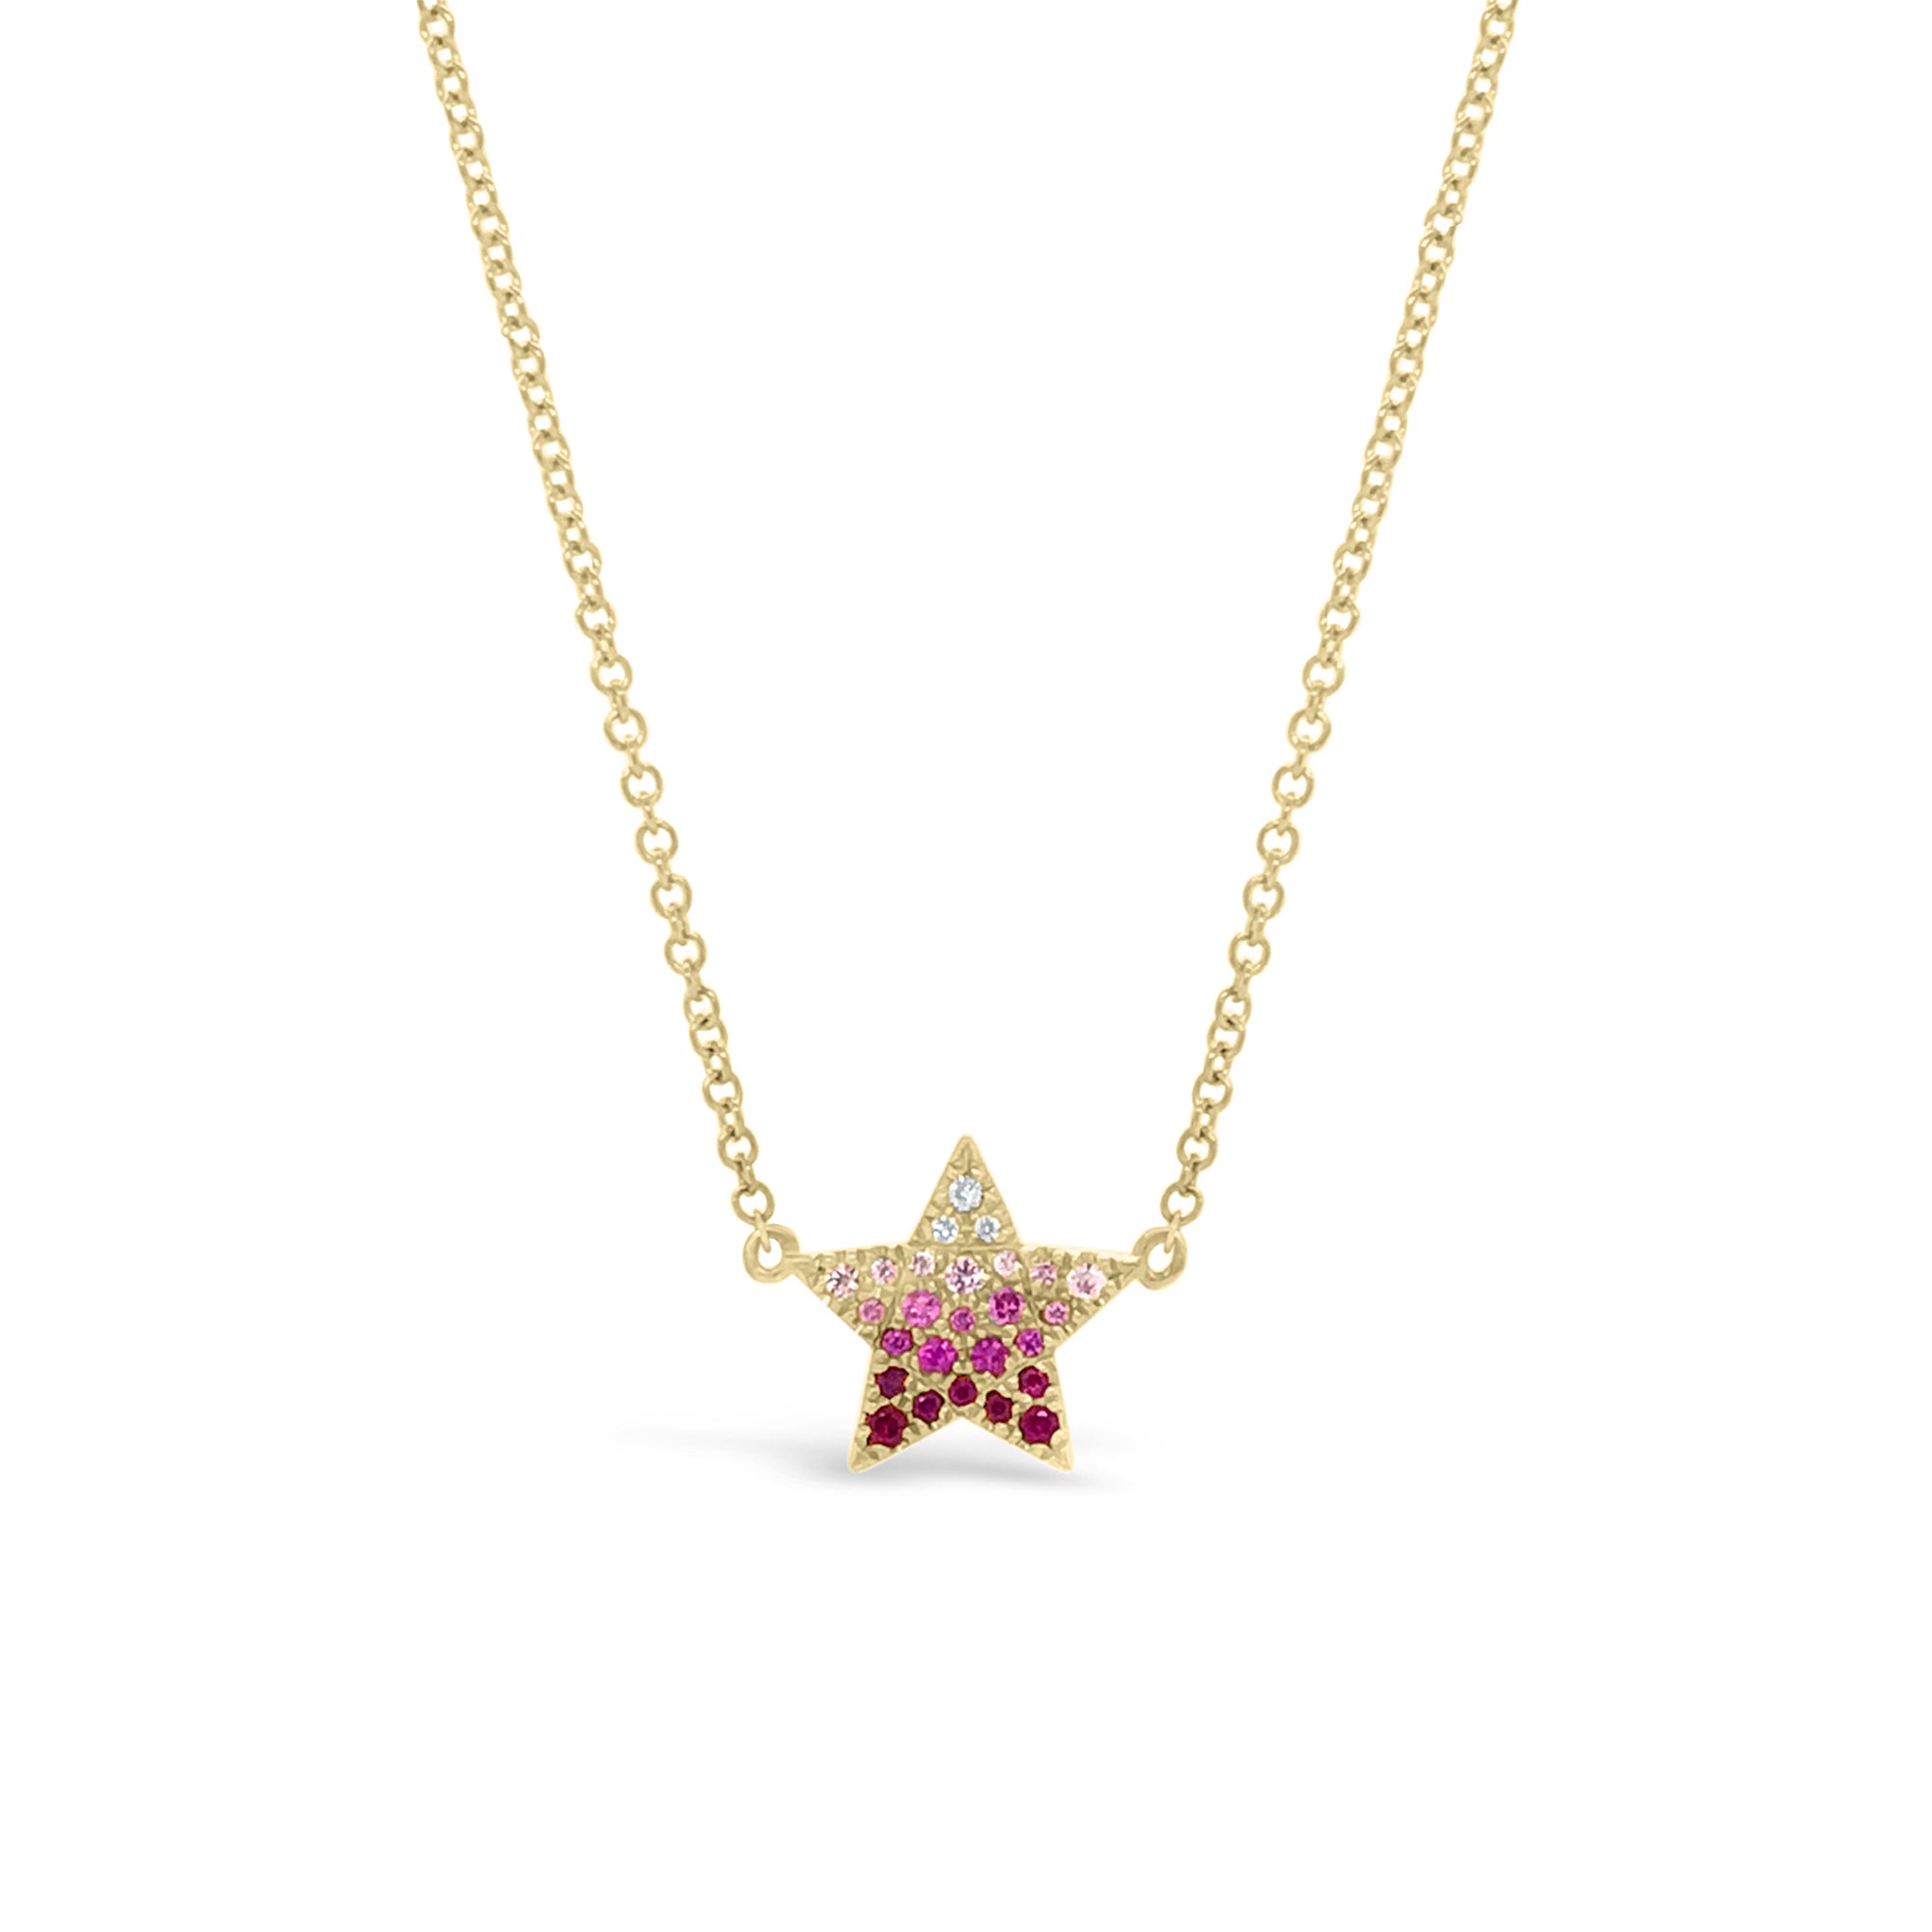 Gradient Gemstone & Diamond Star Necklace  -14K gold weighing 1.80 grams  -23 rubies totaling 0.11 carats  -3 round diamonds totaling .01 carats